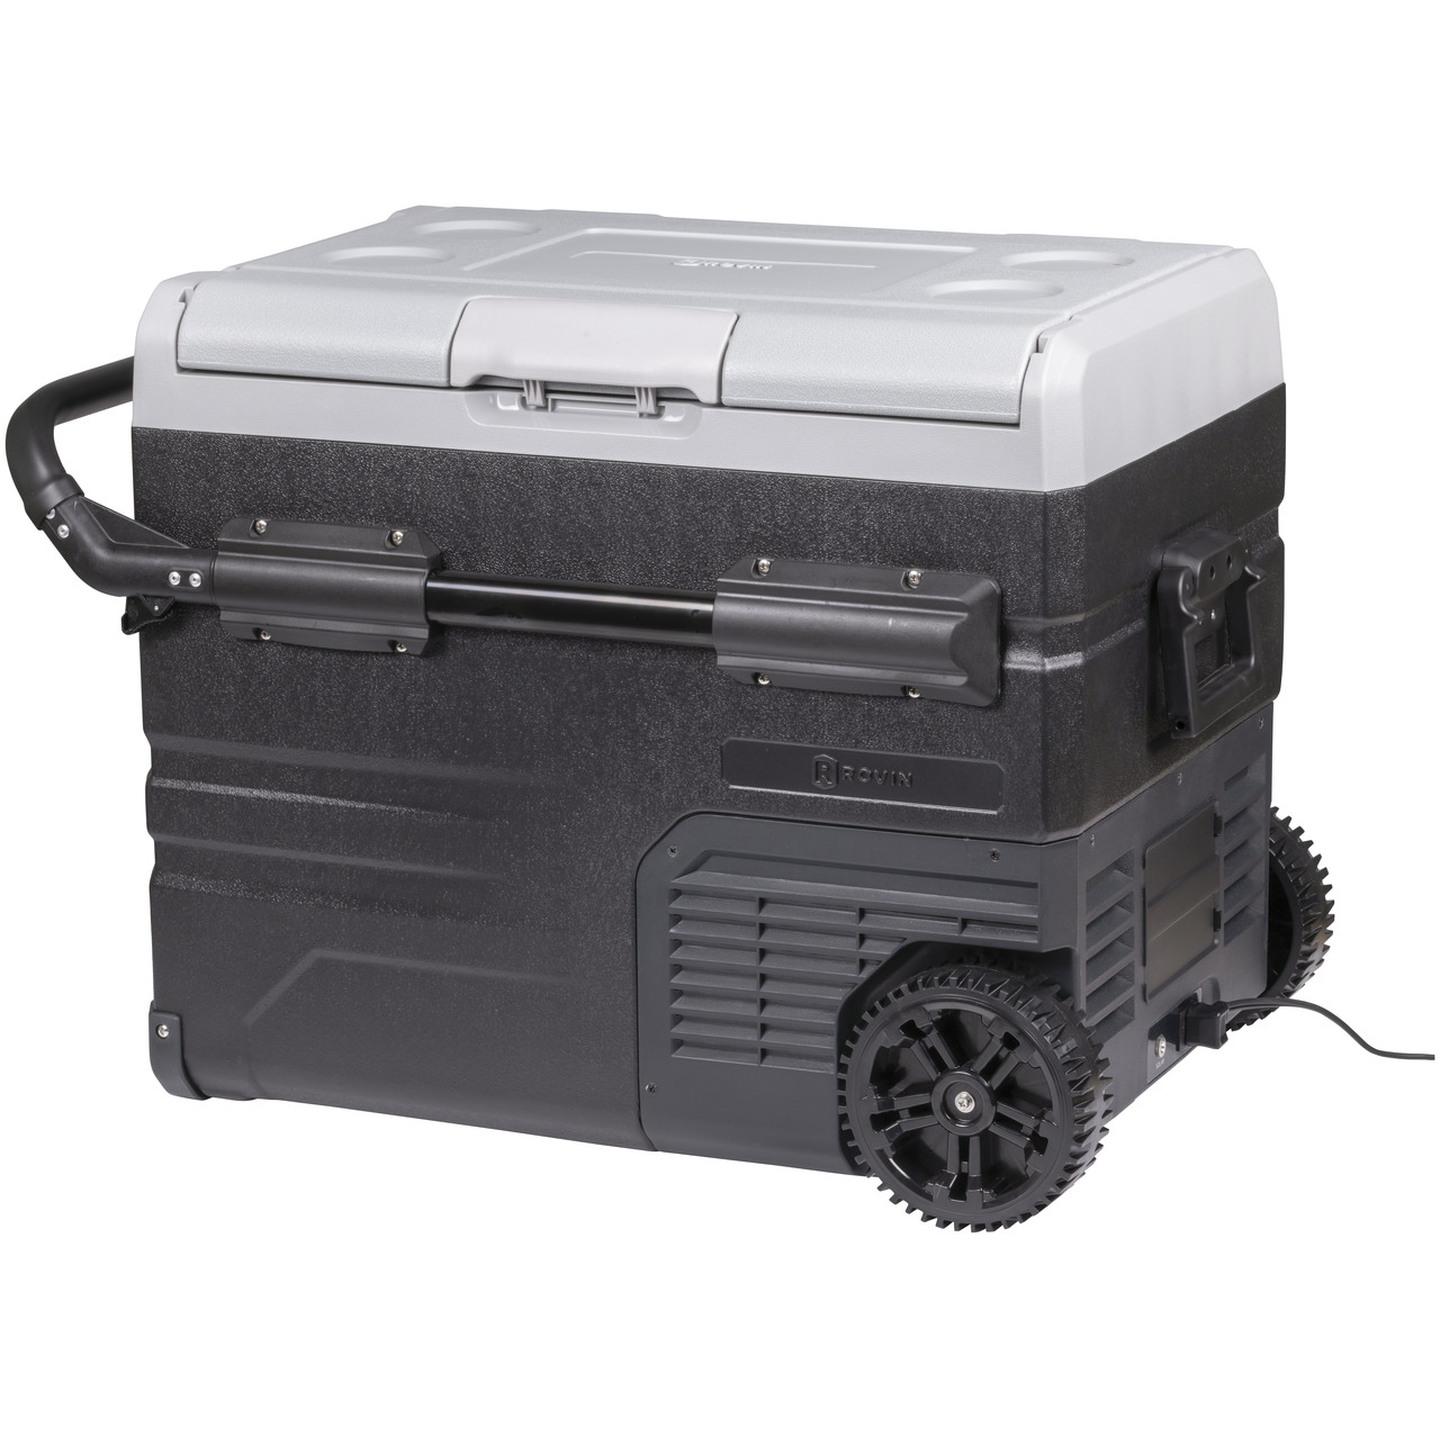 45L Rovin Portable Dual Zone Fridge Freezer with Solar Charger Board plus Handles  Wheels and Support Removable Battery